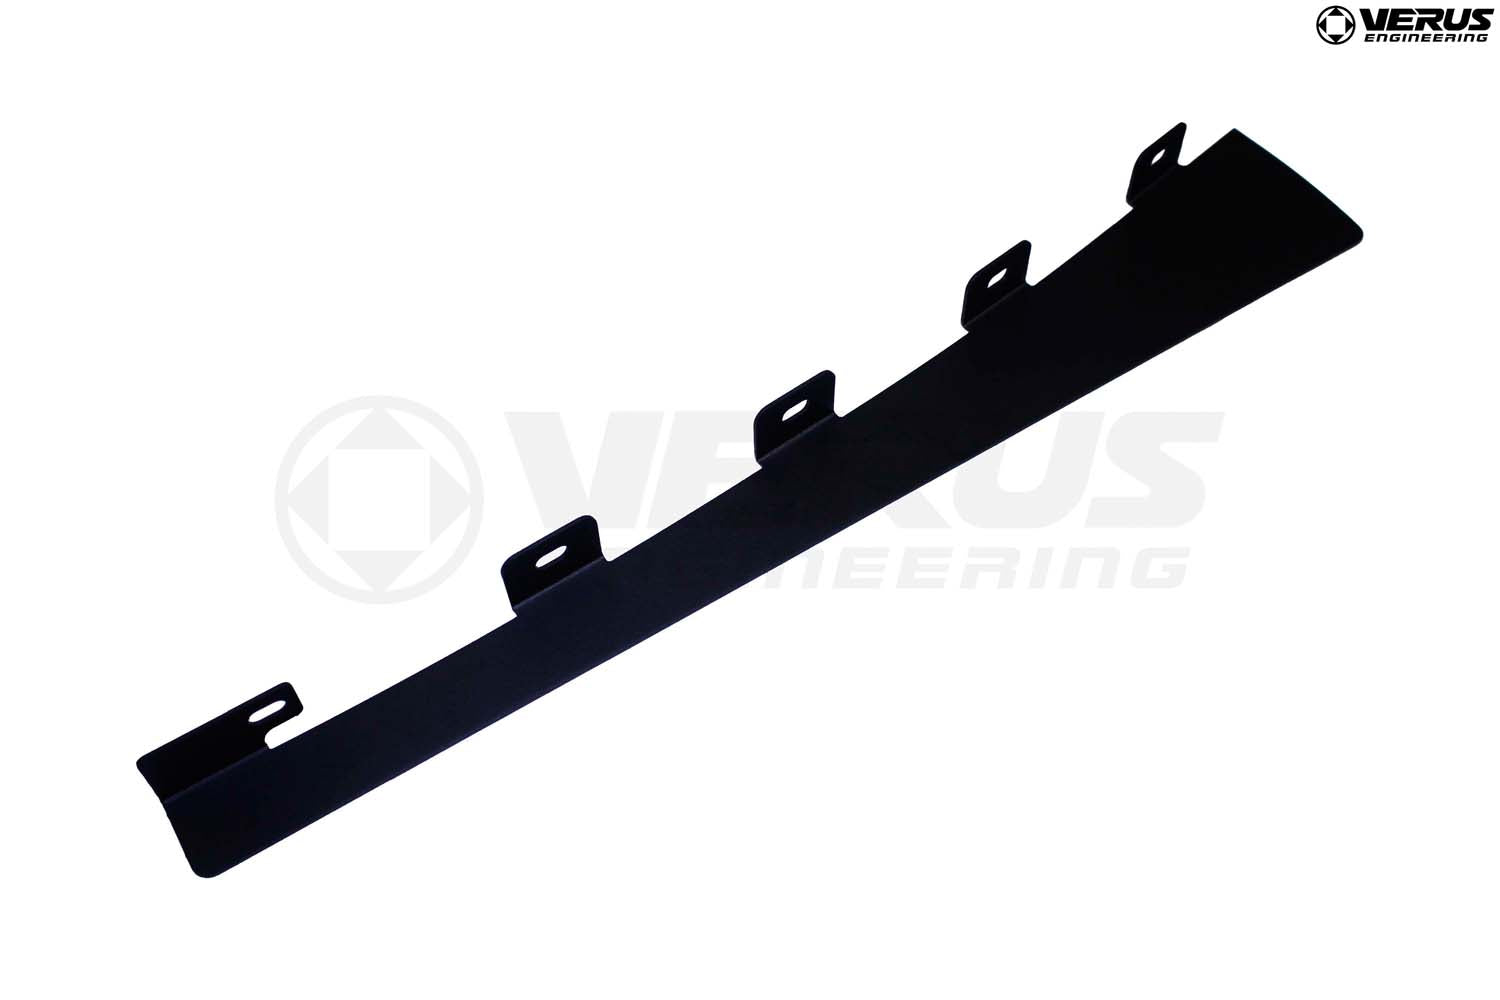 Rear Diffuser Strake Kit - S550 Ford Mustang Shelby GT350